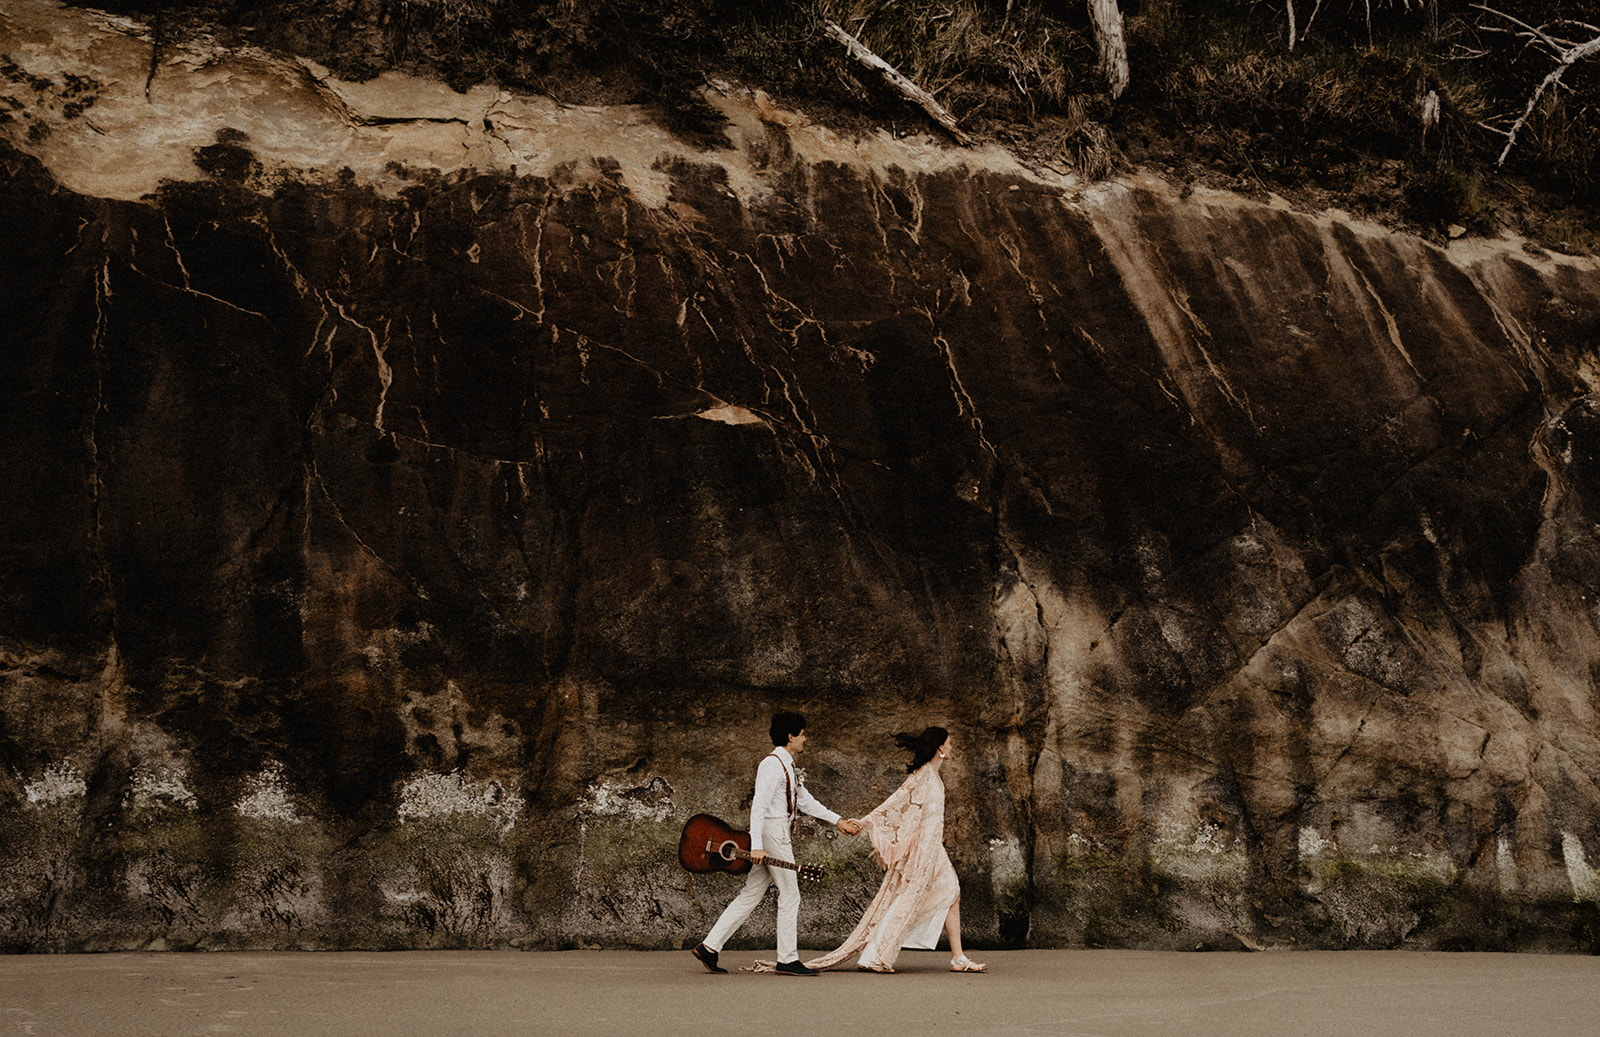 Bride leads groom along a rocky shore during their destination elopement.